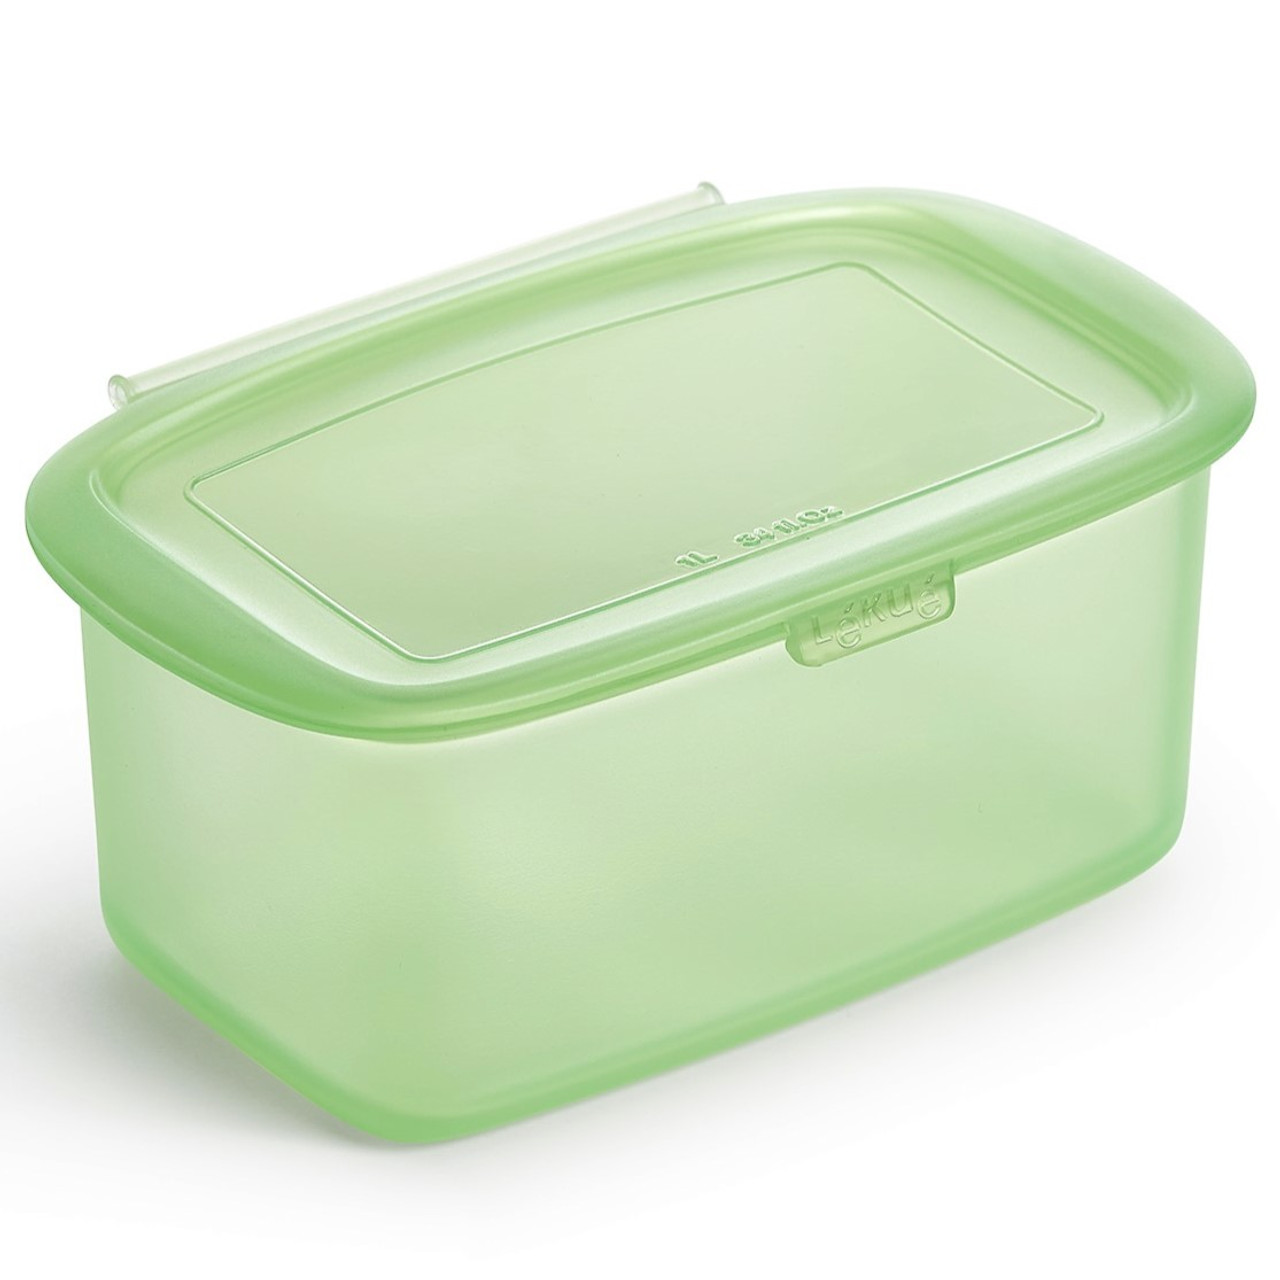 1000ml Rectangular Container with Lid